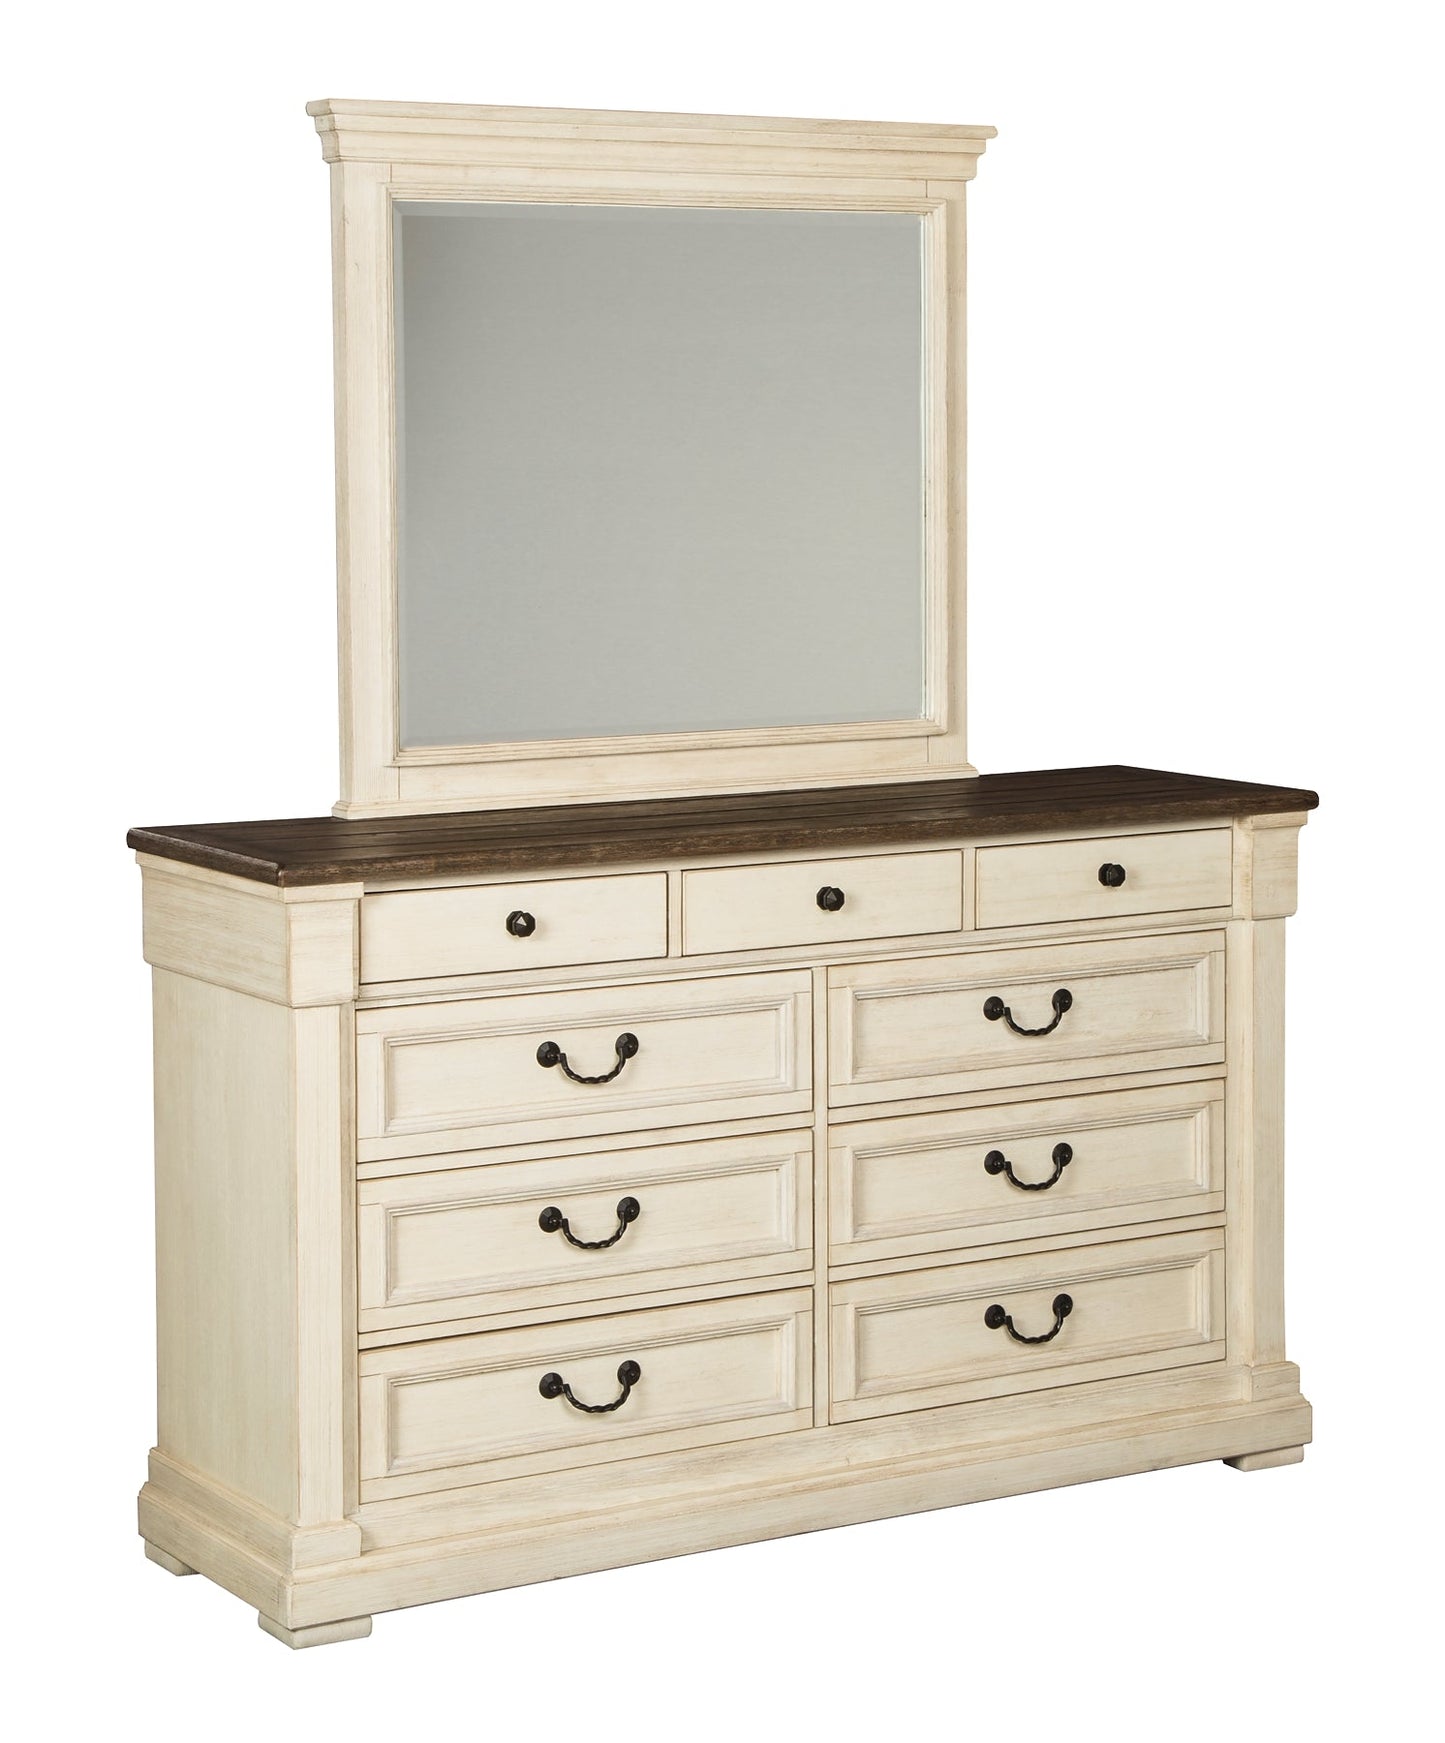 Bolanburg California King Panel Bed with Mirrored Dresser Smyrna Furniture Outlet